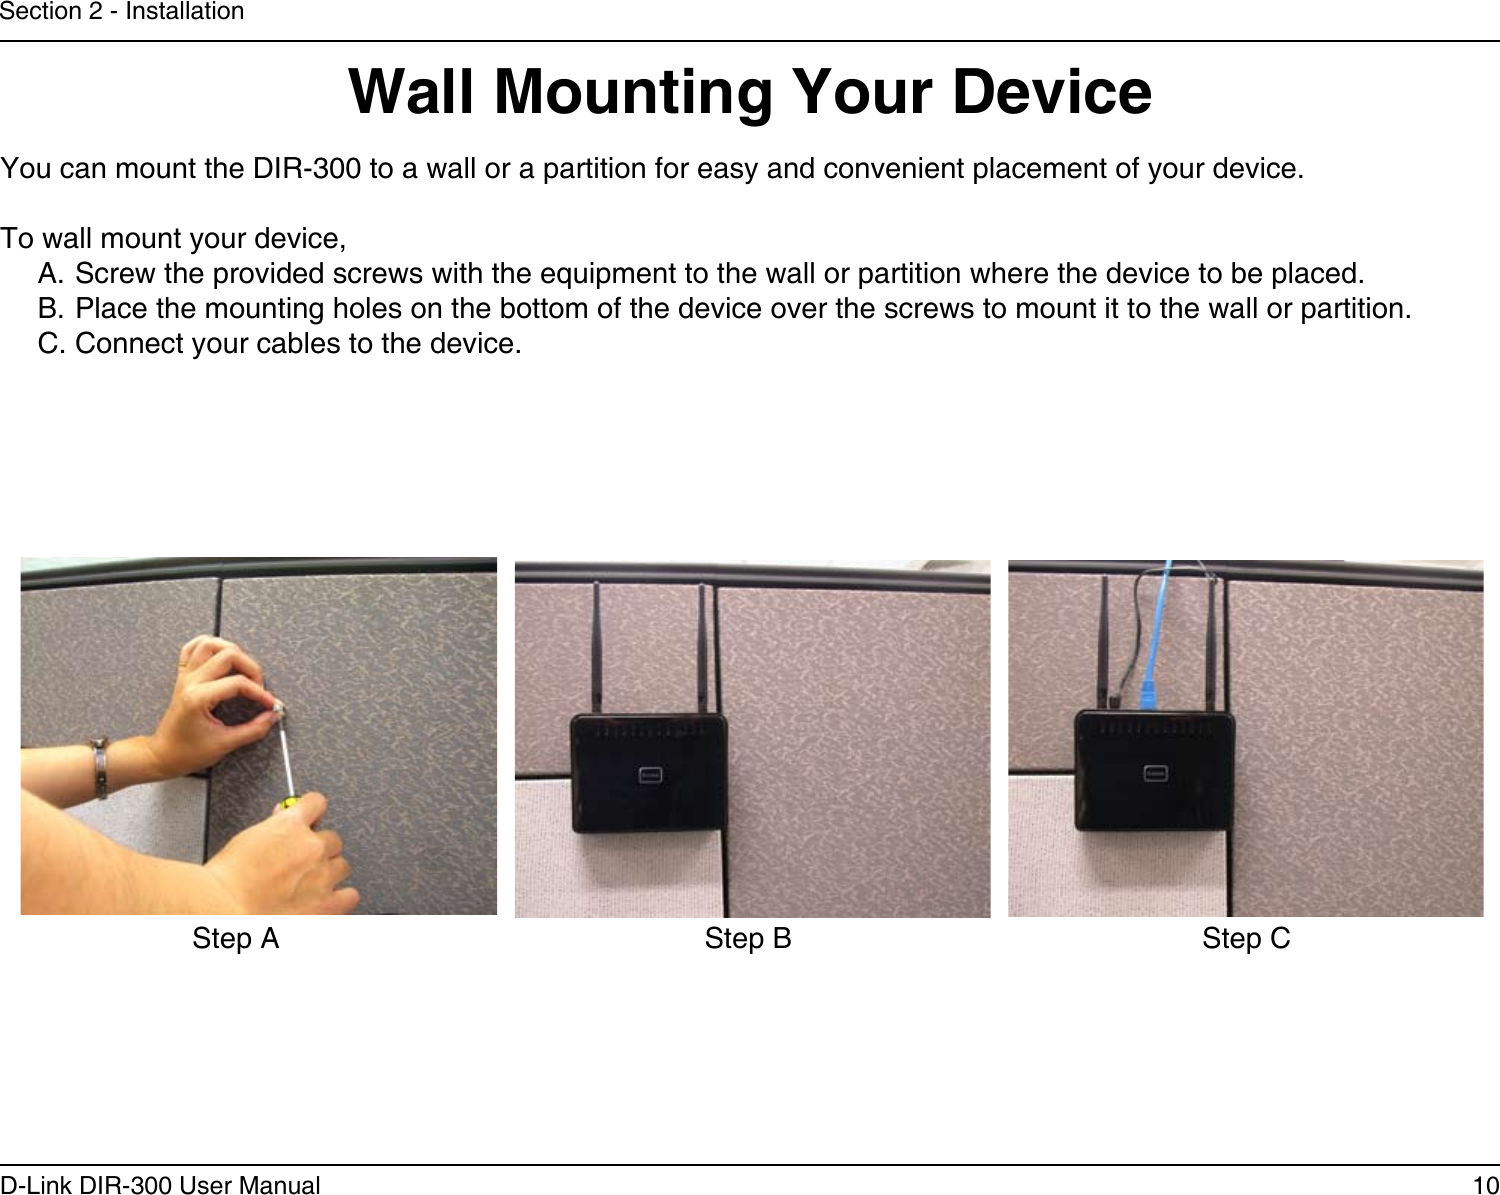 10D-Link DIR-300 User ManualSection 2 - InstallationWall Mounting Your DeviceYou can mount the DIR-300 to a wall or a partition for easy and convenient placement of your device.To wall mount your device,A. Screw the provided screws with the equipment to the wall or partition where the device to be placed.B. Place the mounting holes on the bottom of the device over the screws to mount it to the wall or partition.C. Connect your cables to the device.Step A Step B Step C